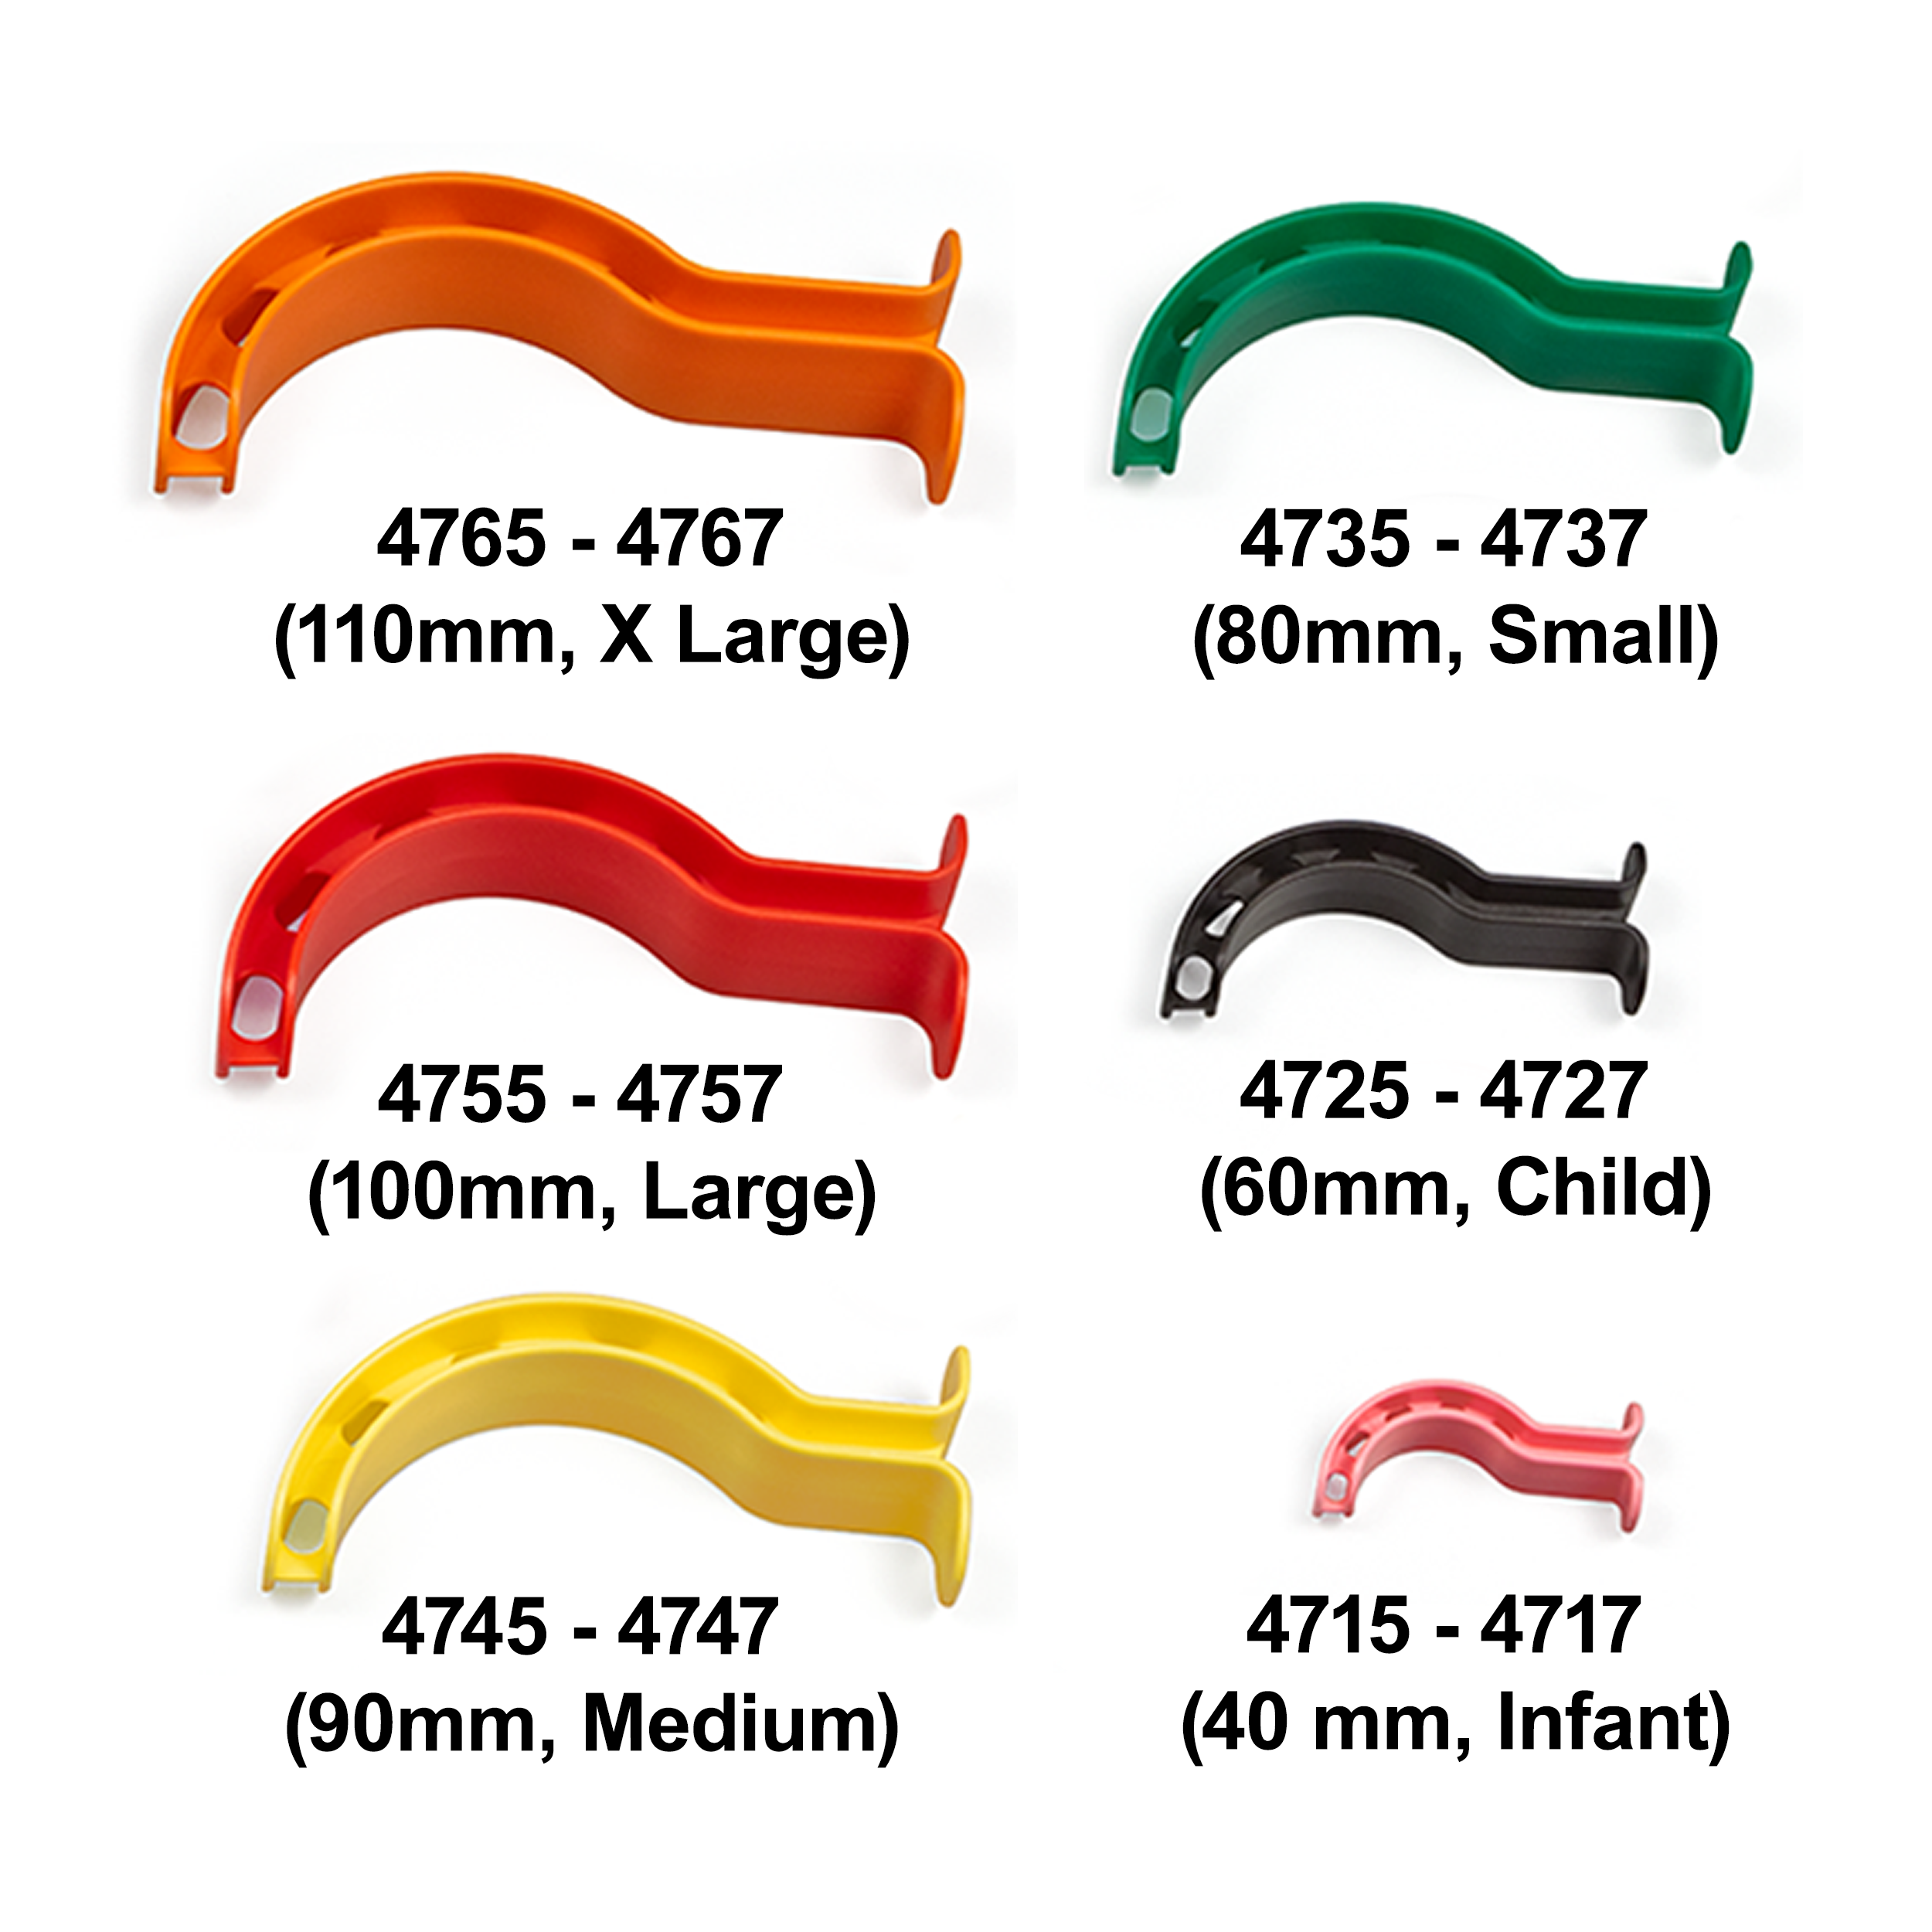 C-ORAL-ROM and C-ORAL-BRASIL sizes compared